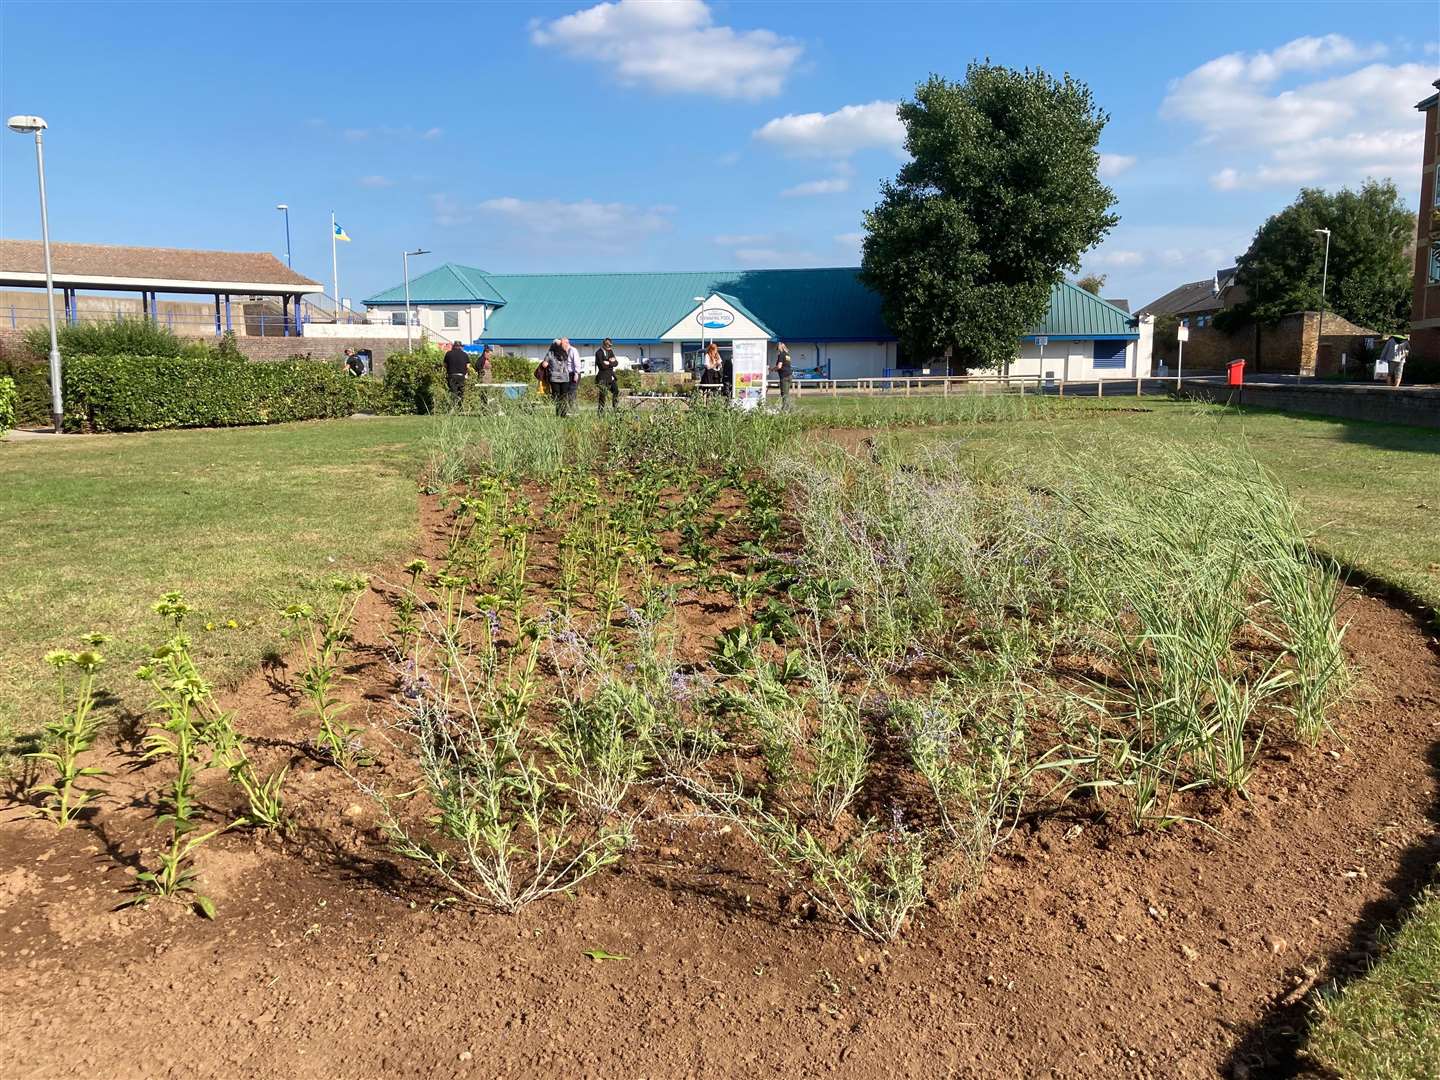 The new-look Beachfiels seafront park at Sheerness is bursting into colour with the recent planting of bee-friendly plants in the flower beds